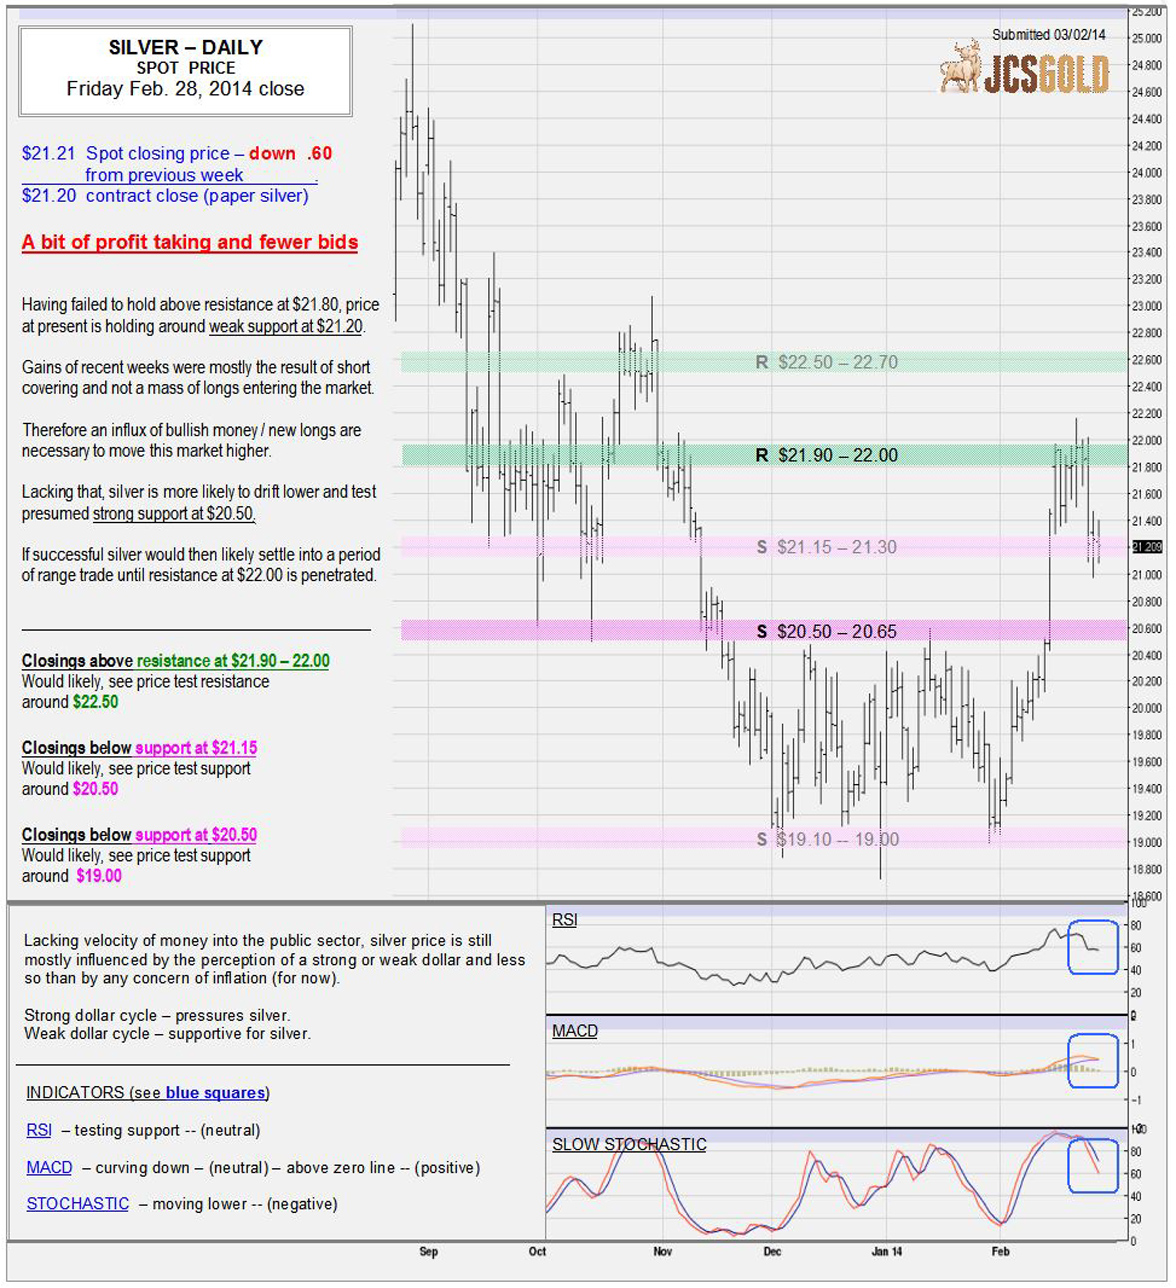 Feb 28, 2014 chart & commentary